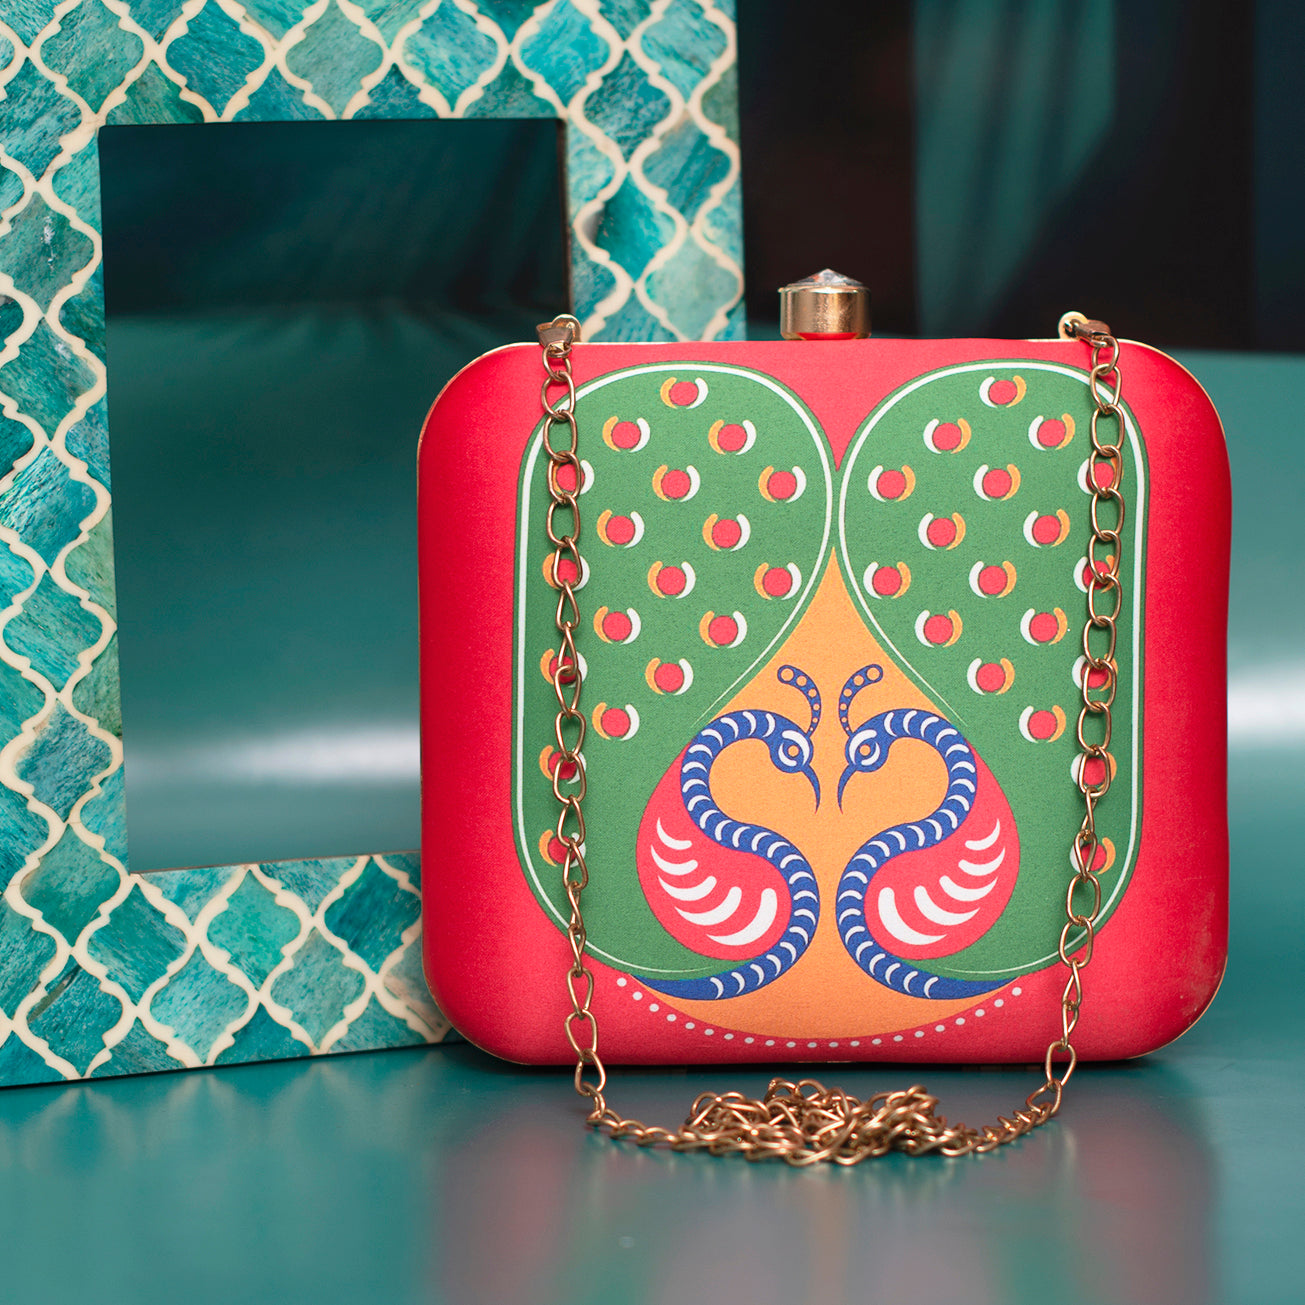 Two Peacock Printed Clutch